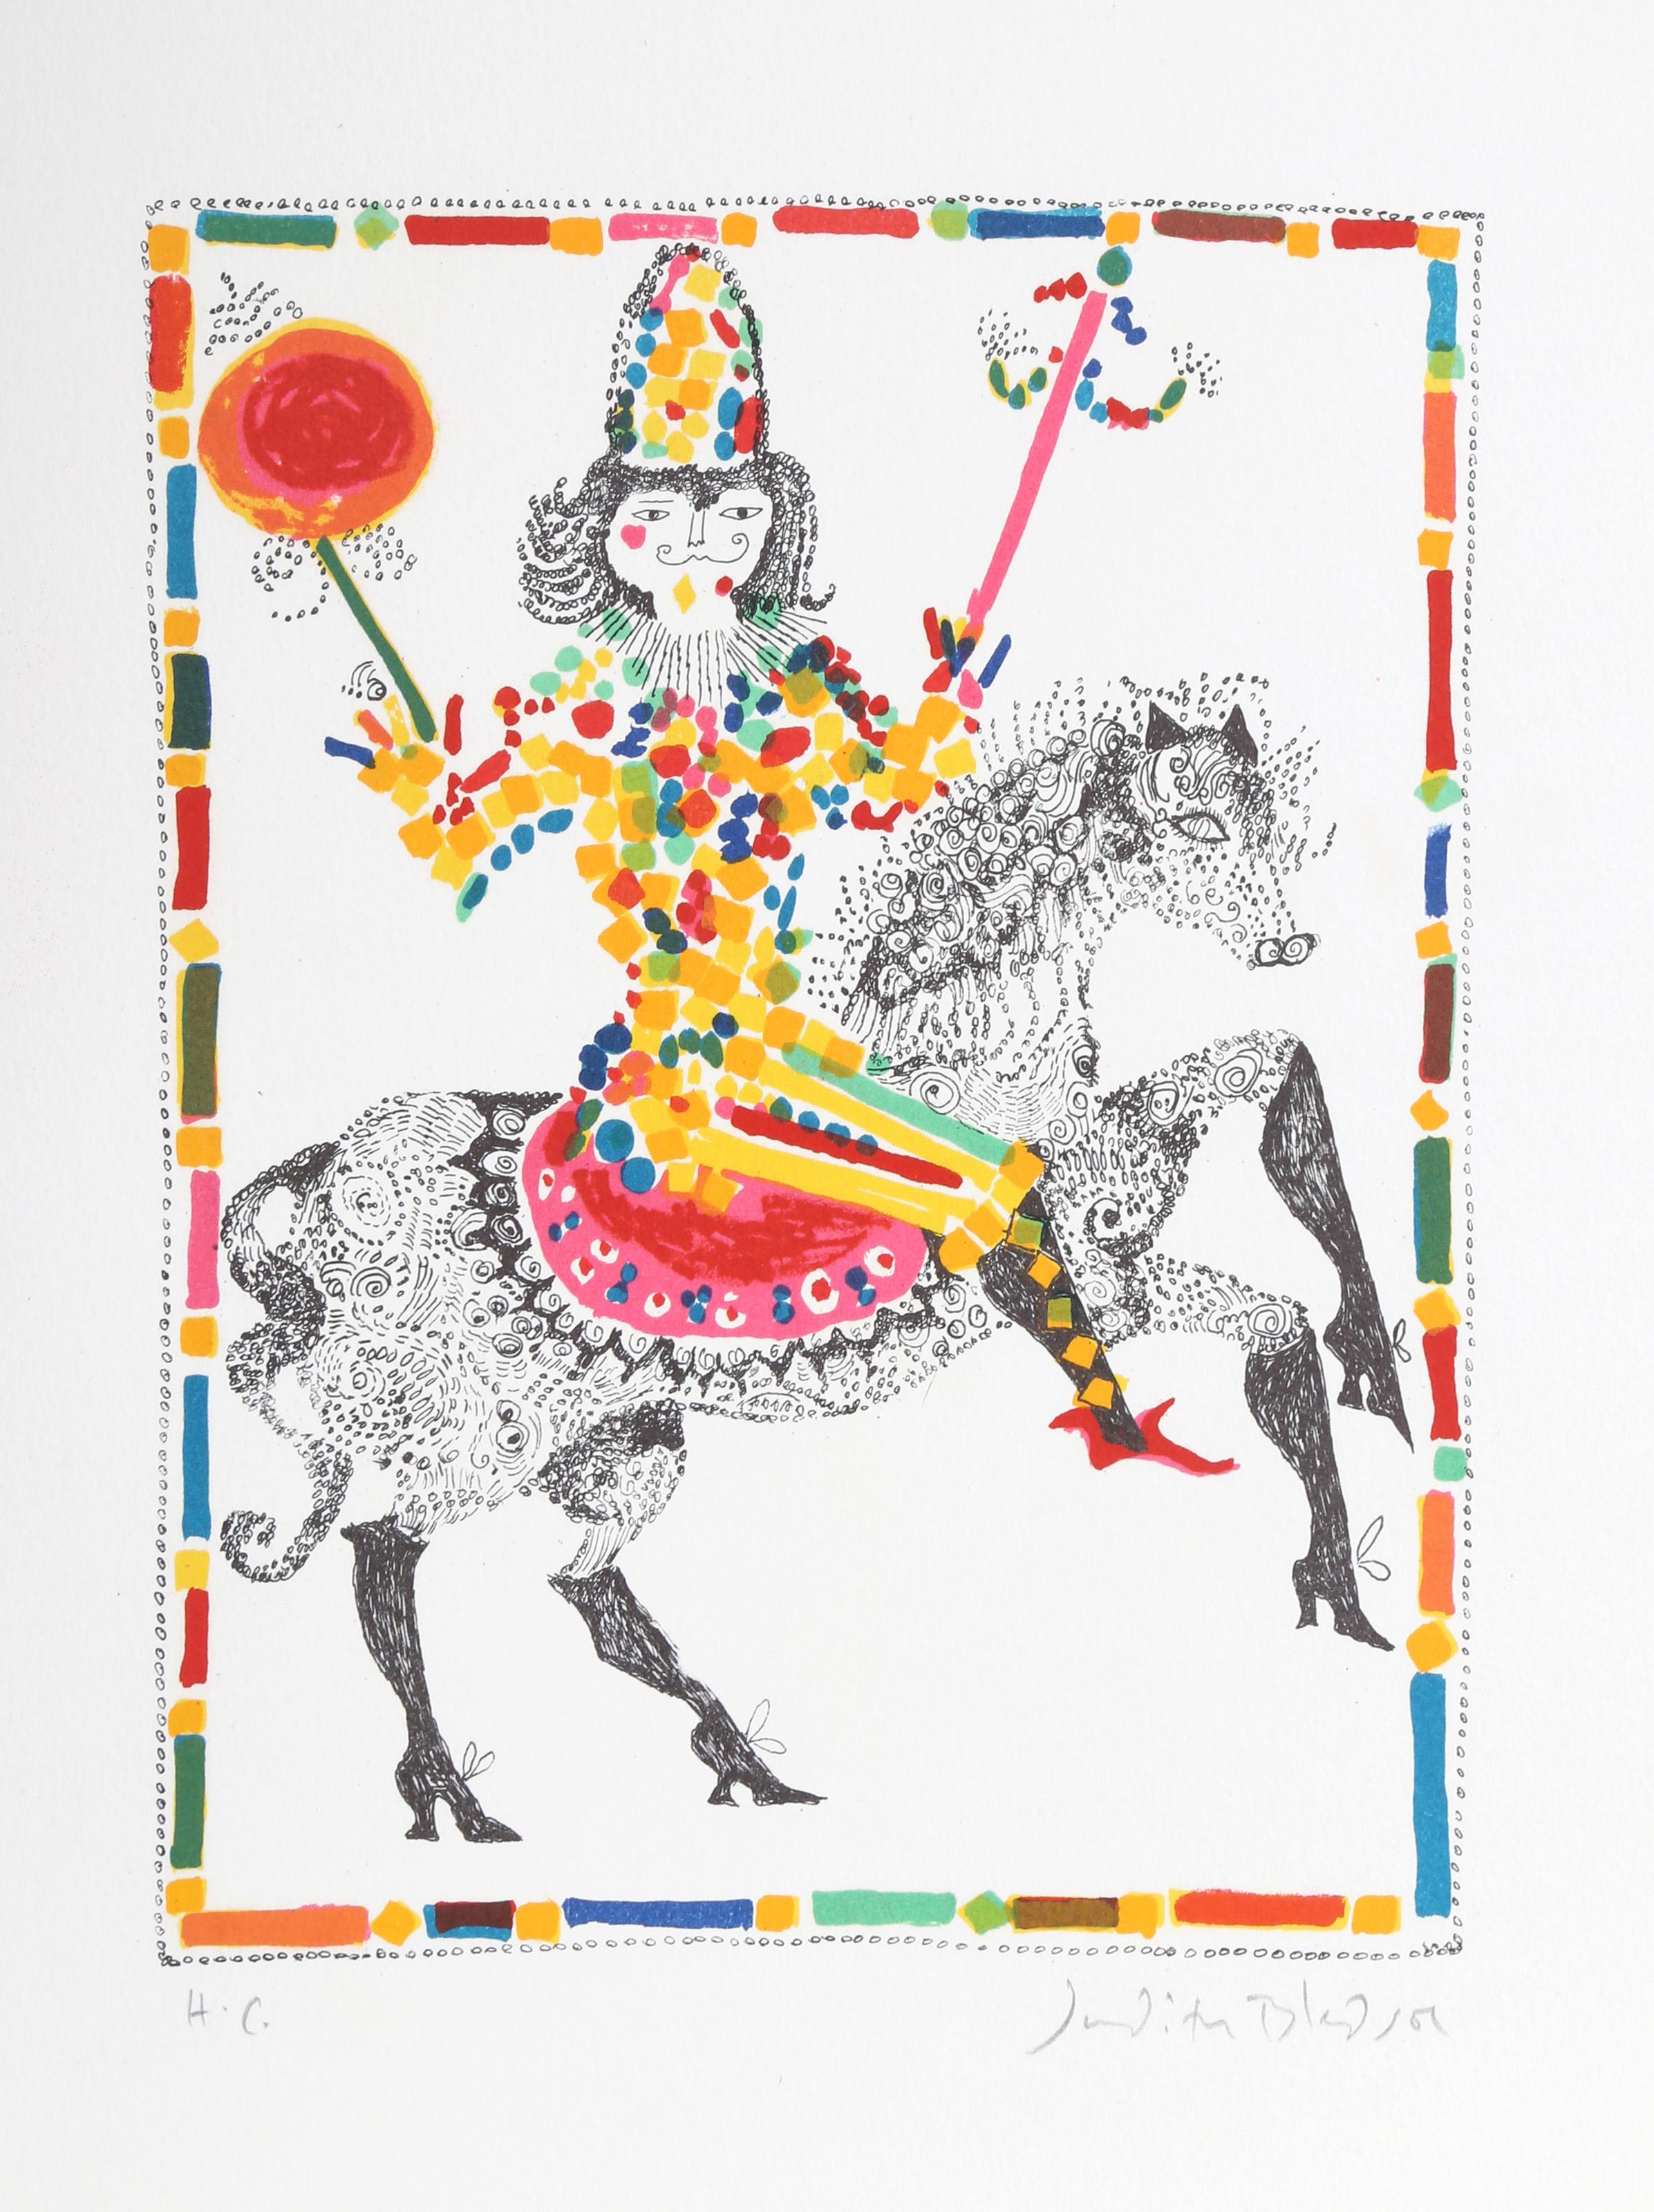 Judith Bledsoe, American (1938 - 2013) -  Clown on Horse from A Little Circus. Year: 1974, Medium: Lithograph, signed in pencil, Edition: HC, Size: 15  x 10.5 in. (38.1  x 26.67 cm), Description: Judith Bledsoe's rendering of a clown riding a horse